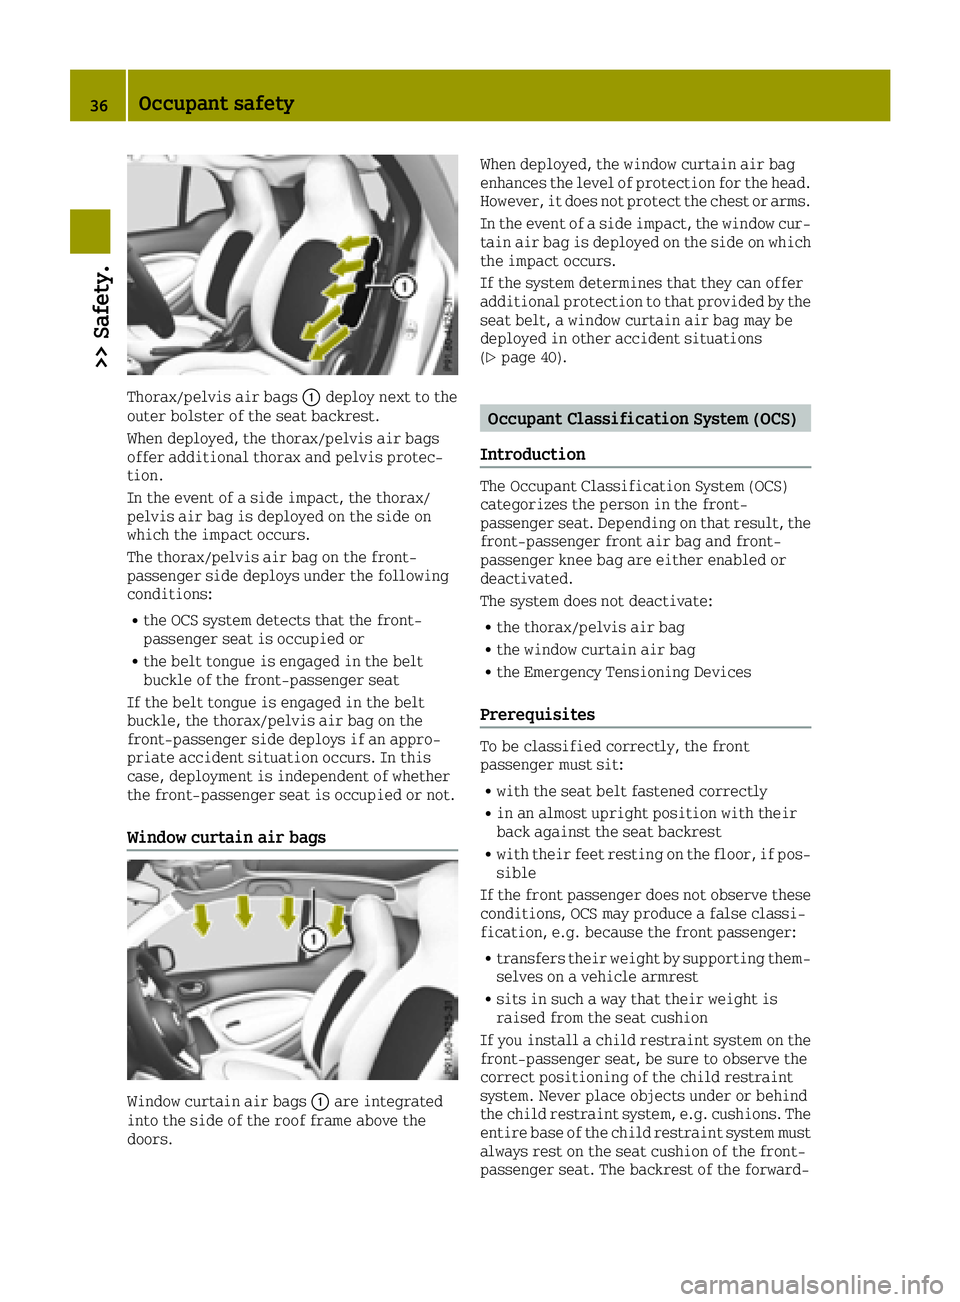 SMART FORTWO 2016  Owners Manual Thorax/pelvis air bags0043deploy next to the
outer bolster of the seat backrest.
When deployed, the thorax/pelvis air bags
offer additional thorax and pelvis protec-
tion.
In the event of a side impac